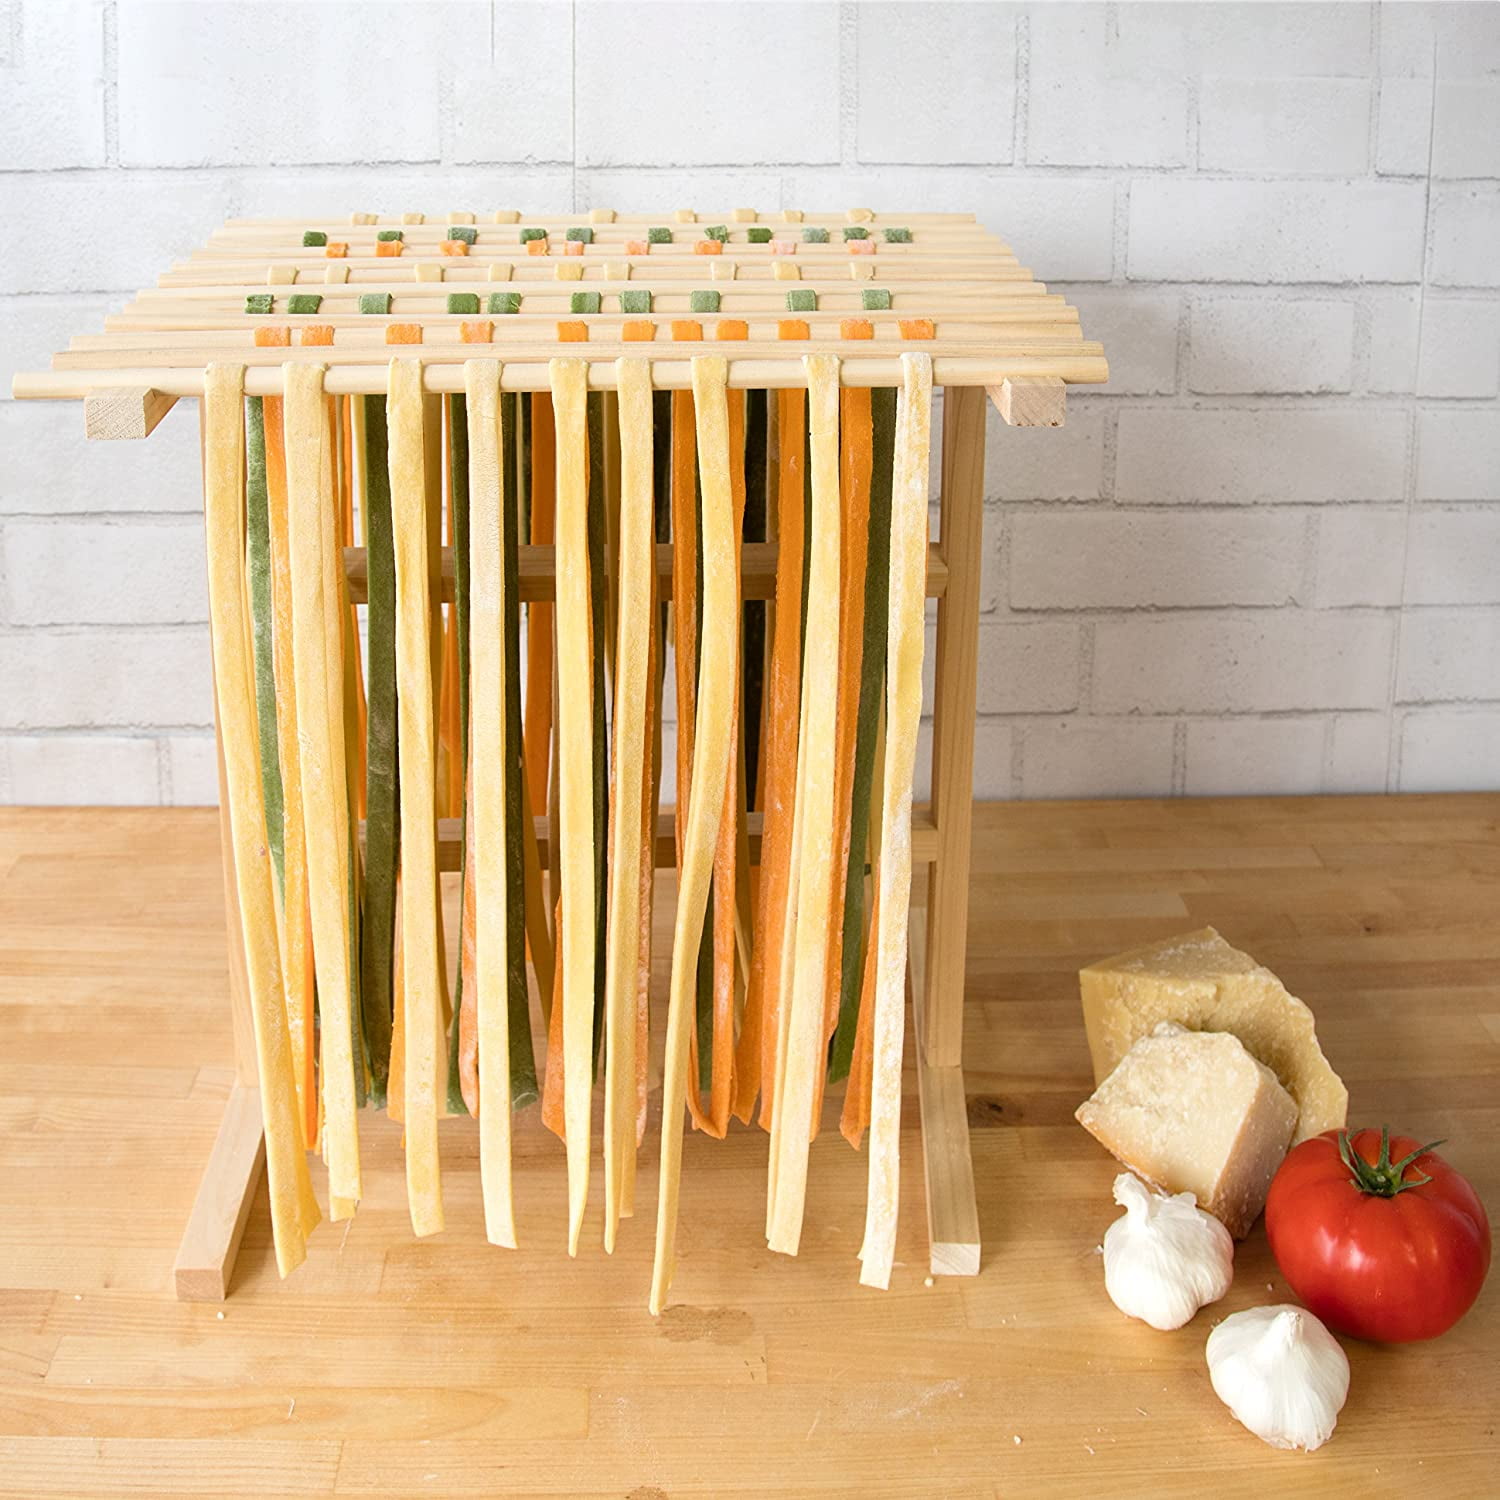 Tohuu Pasta Rack Wooden Noodle Fisherman Pasta Holder with 12 Arms Spaghetti  Drying Rack Noodle Stand for Making Pasta Maker Noodles well-suited 